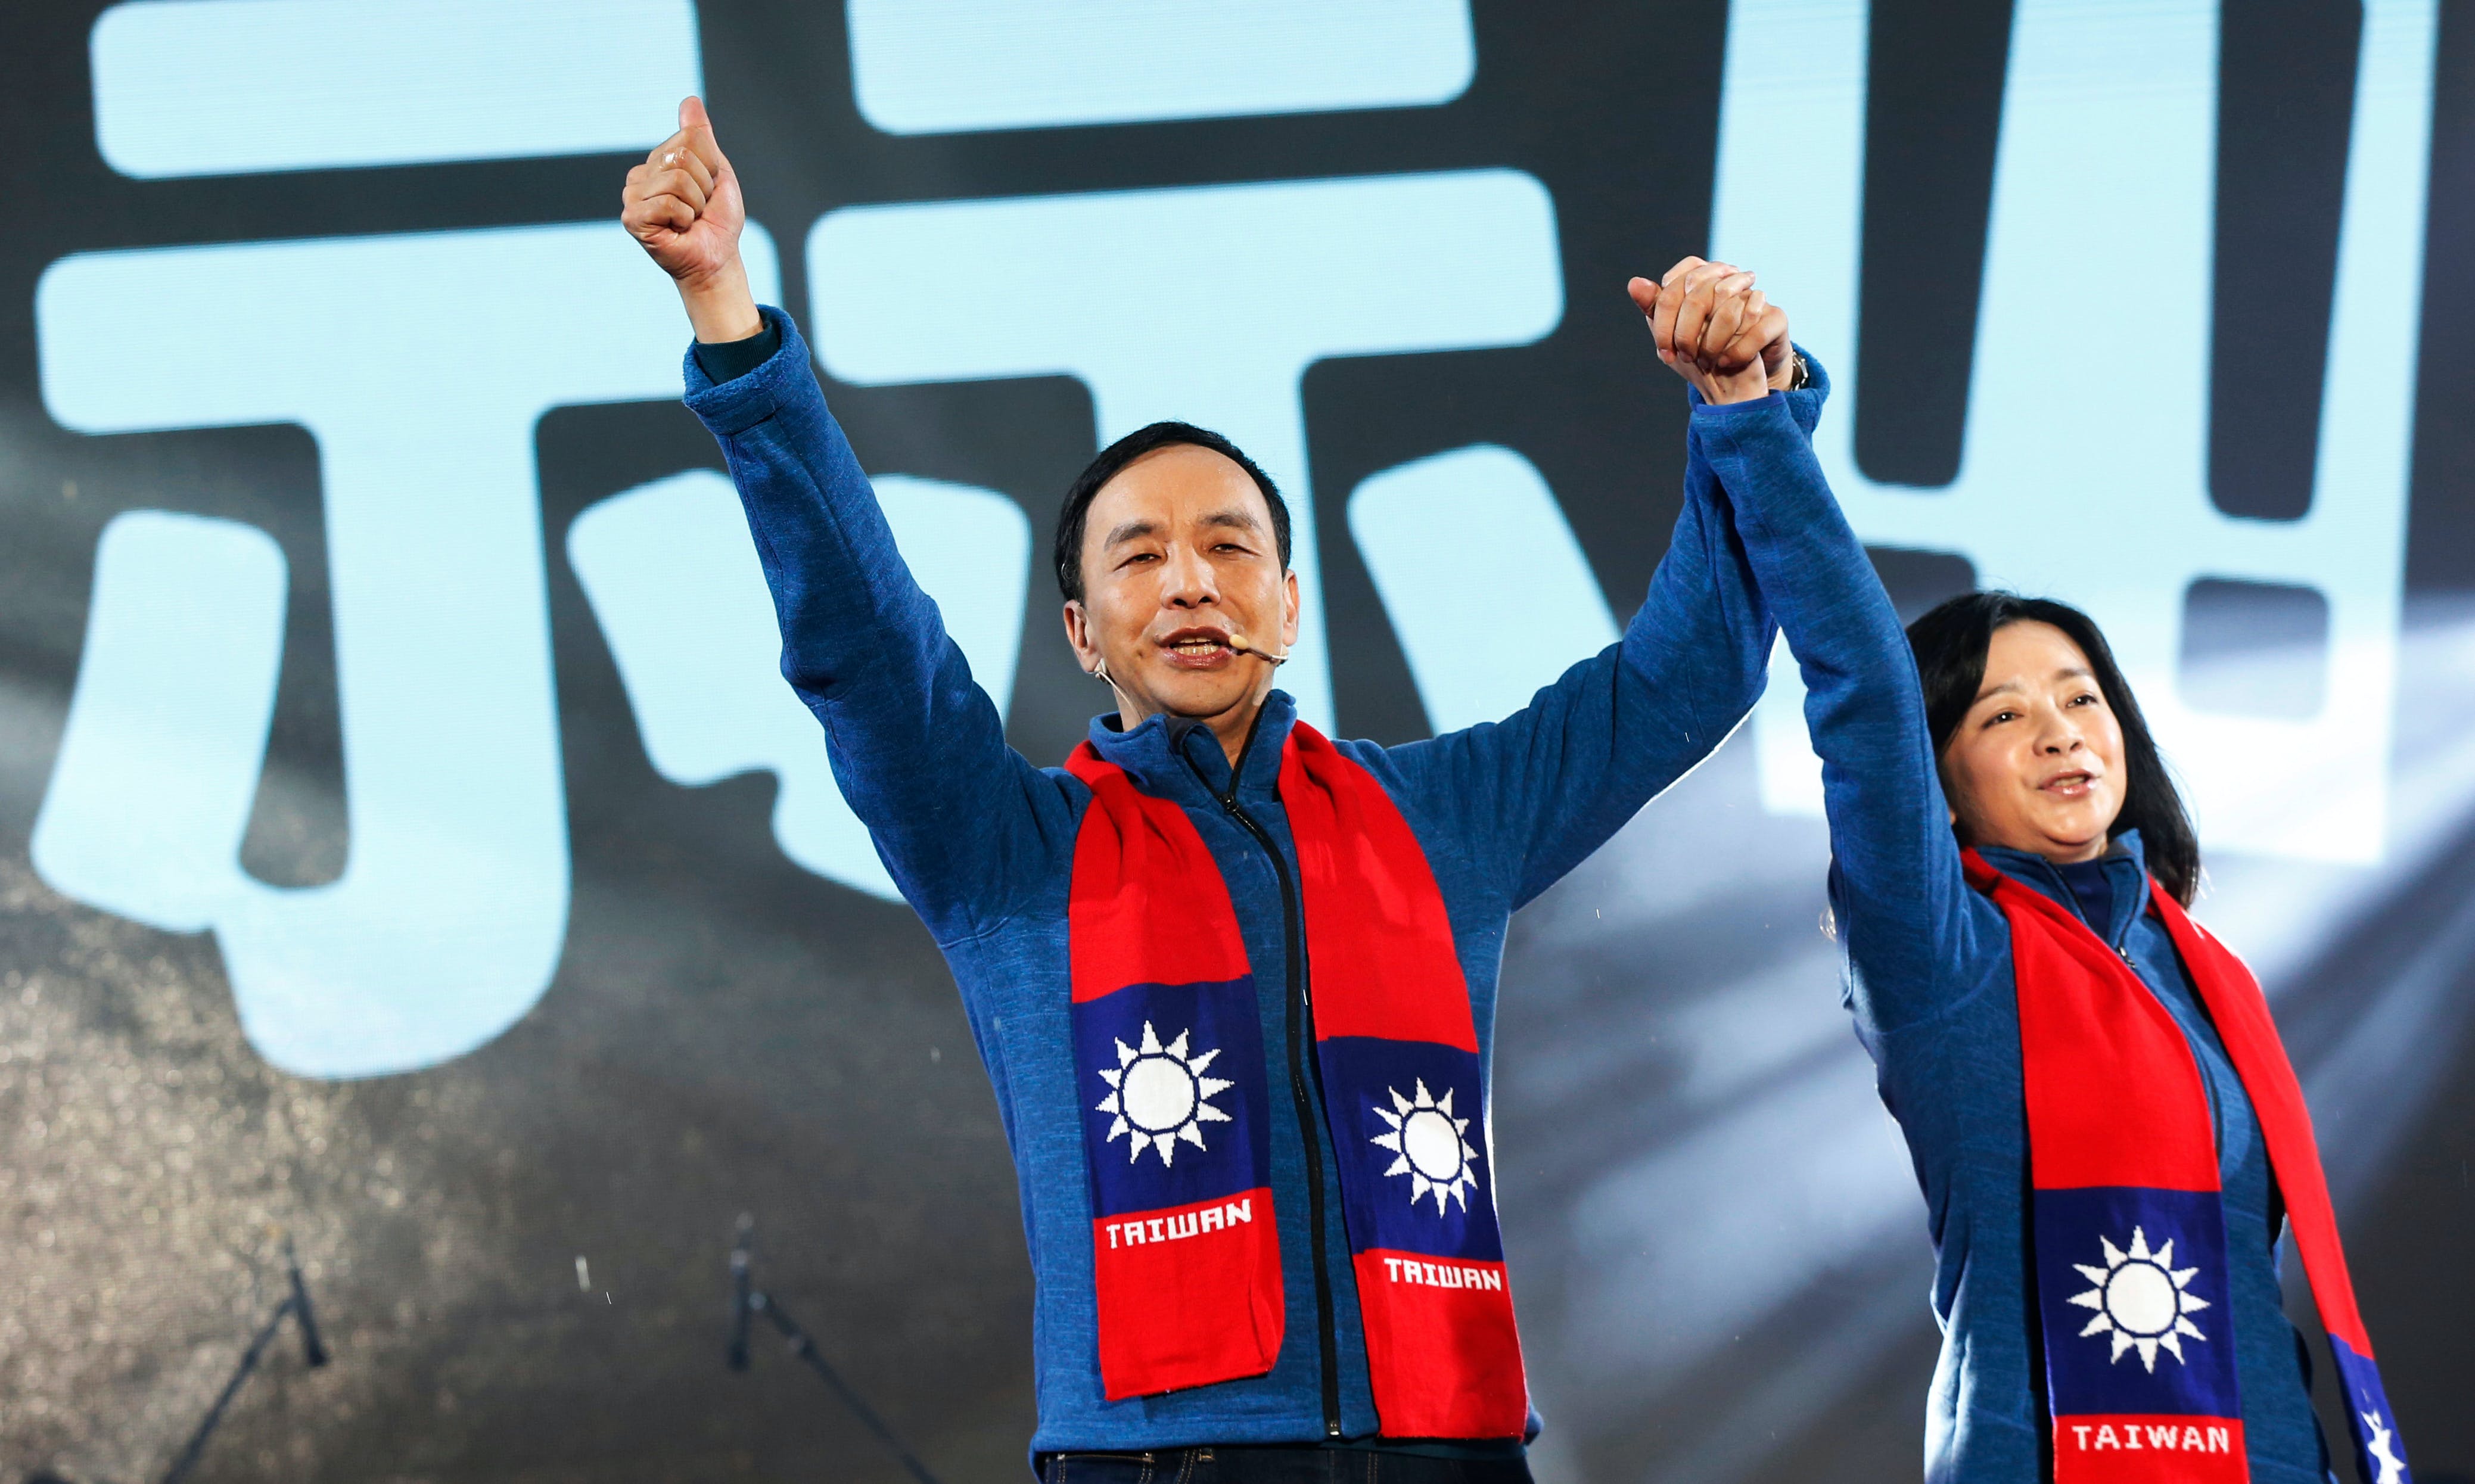 KMT's Eric Chu Announces He Will Run for President in 2020